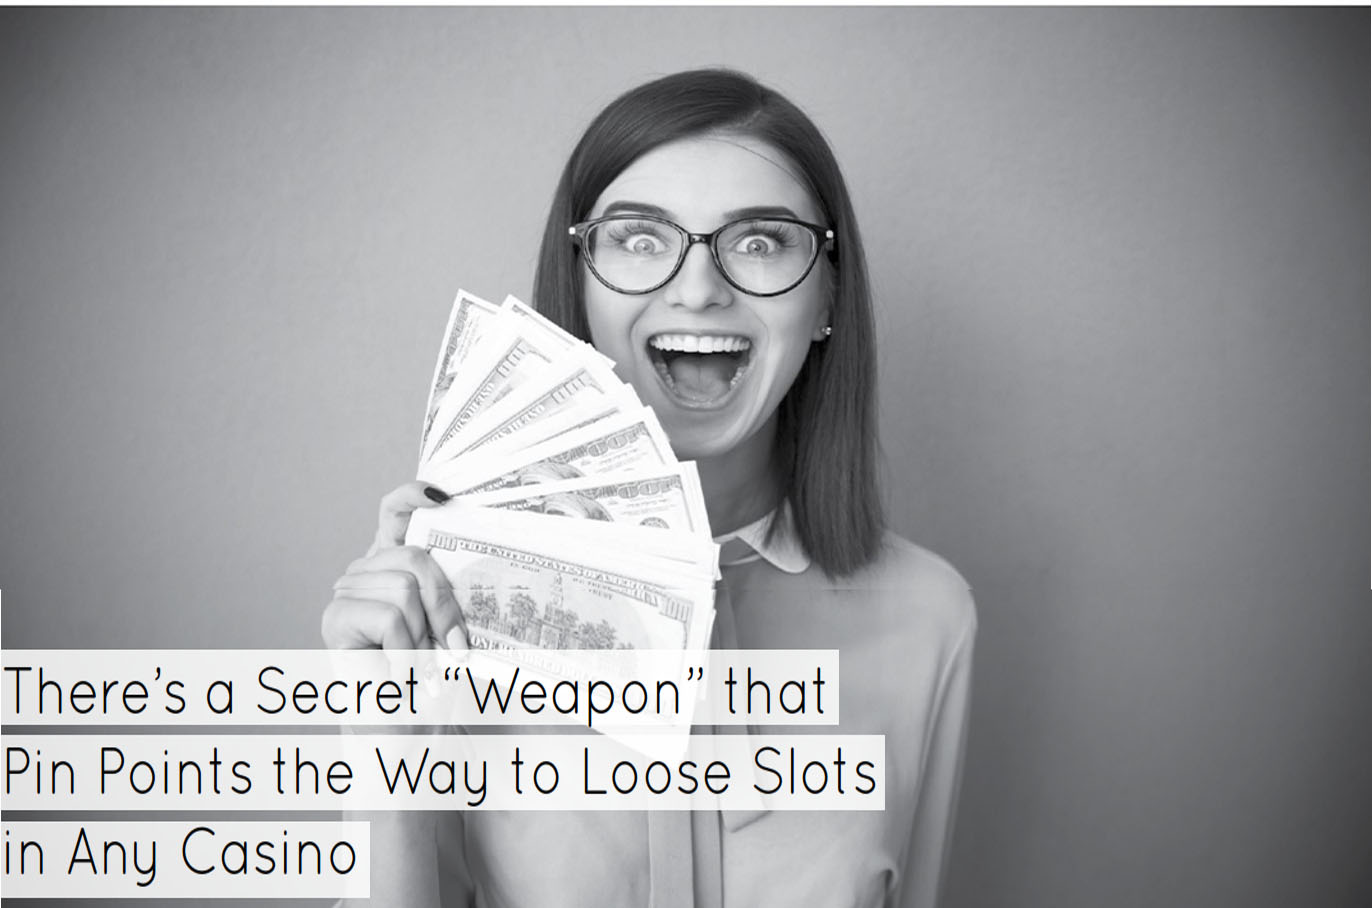 There’s a Secret “Weapon” that Pin Points the Way to Loose Slots in Any Casino